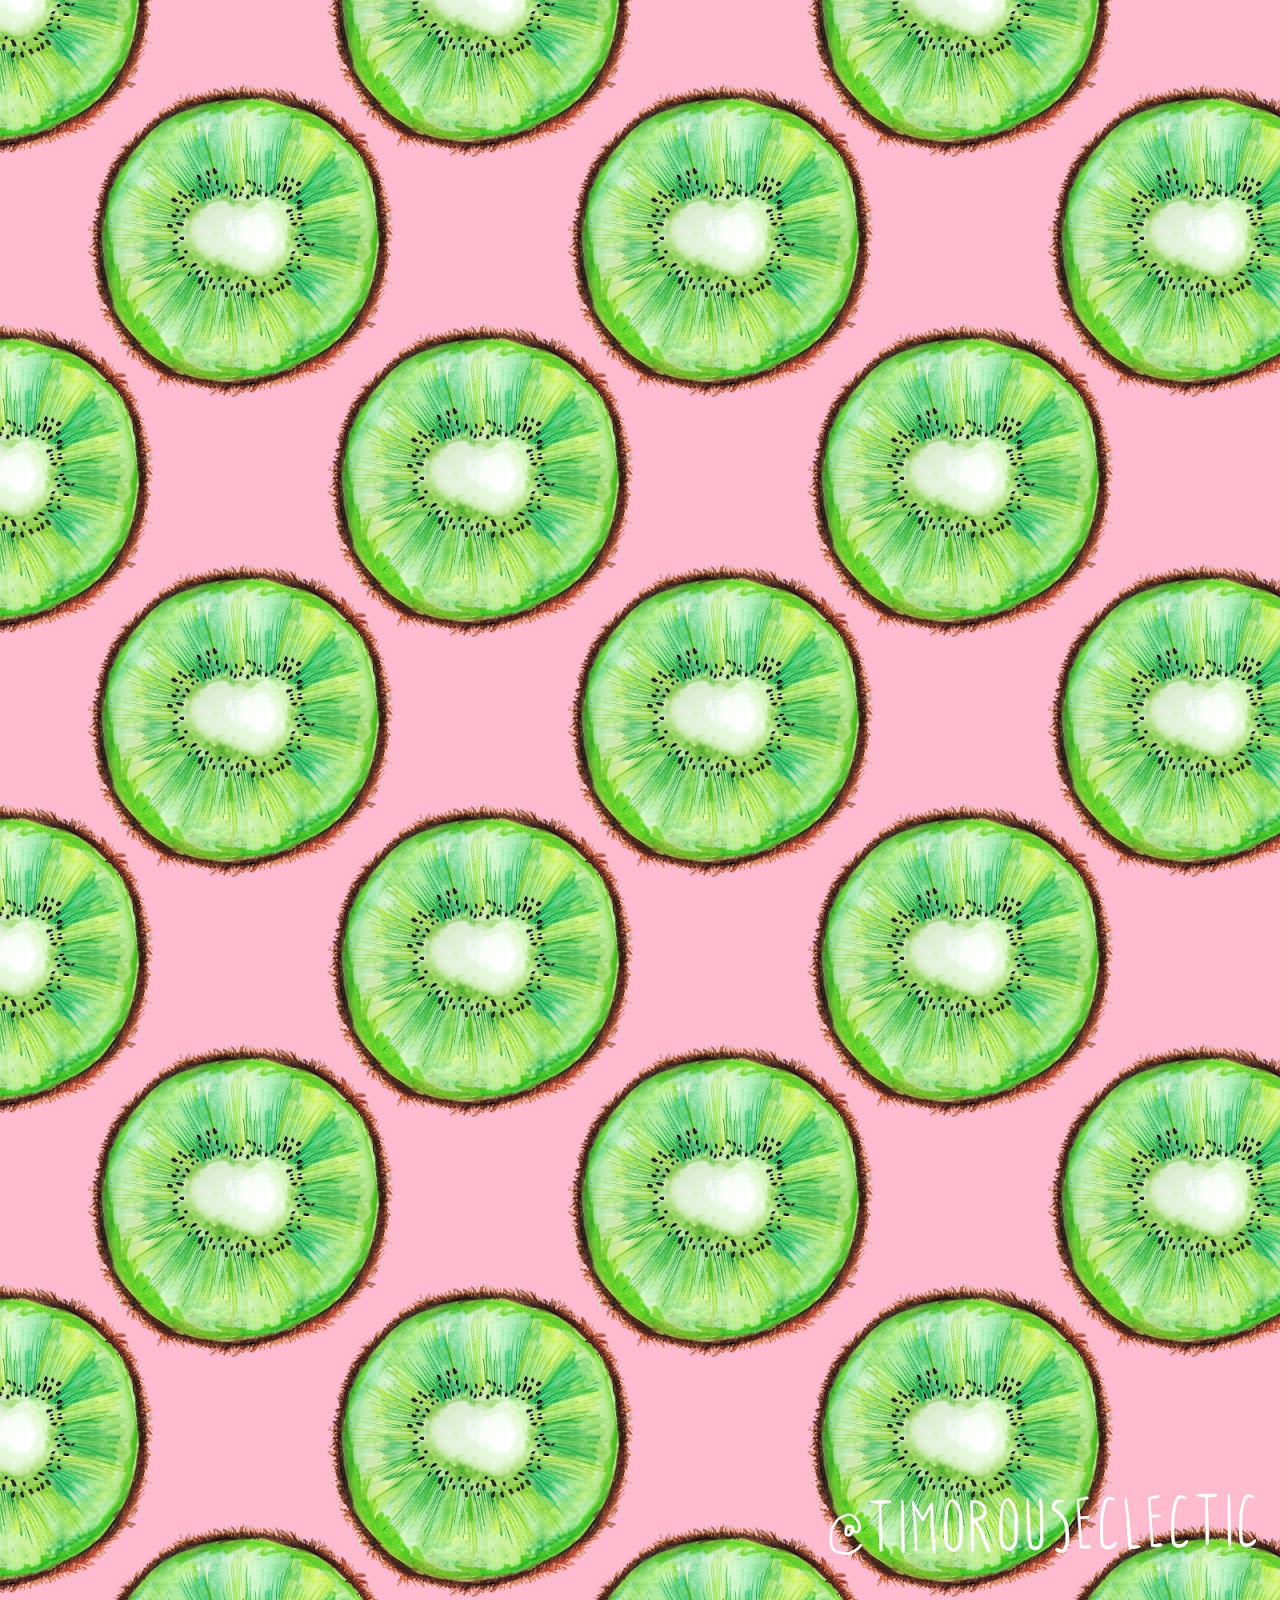 watercolor and mixed media kiwi fruit slices on a pale pink background.